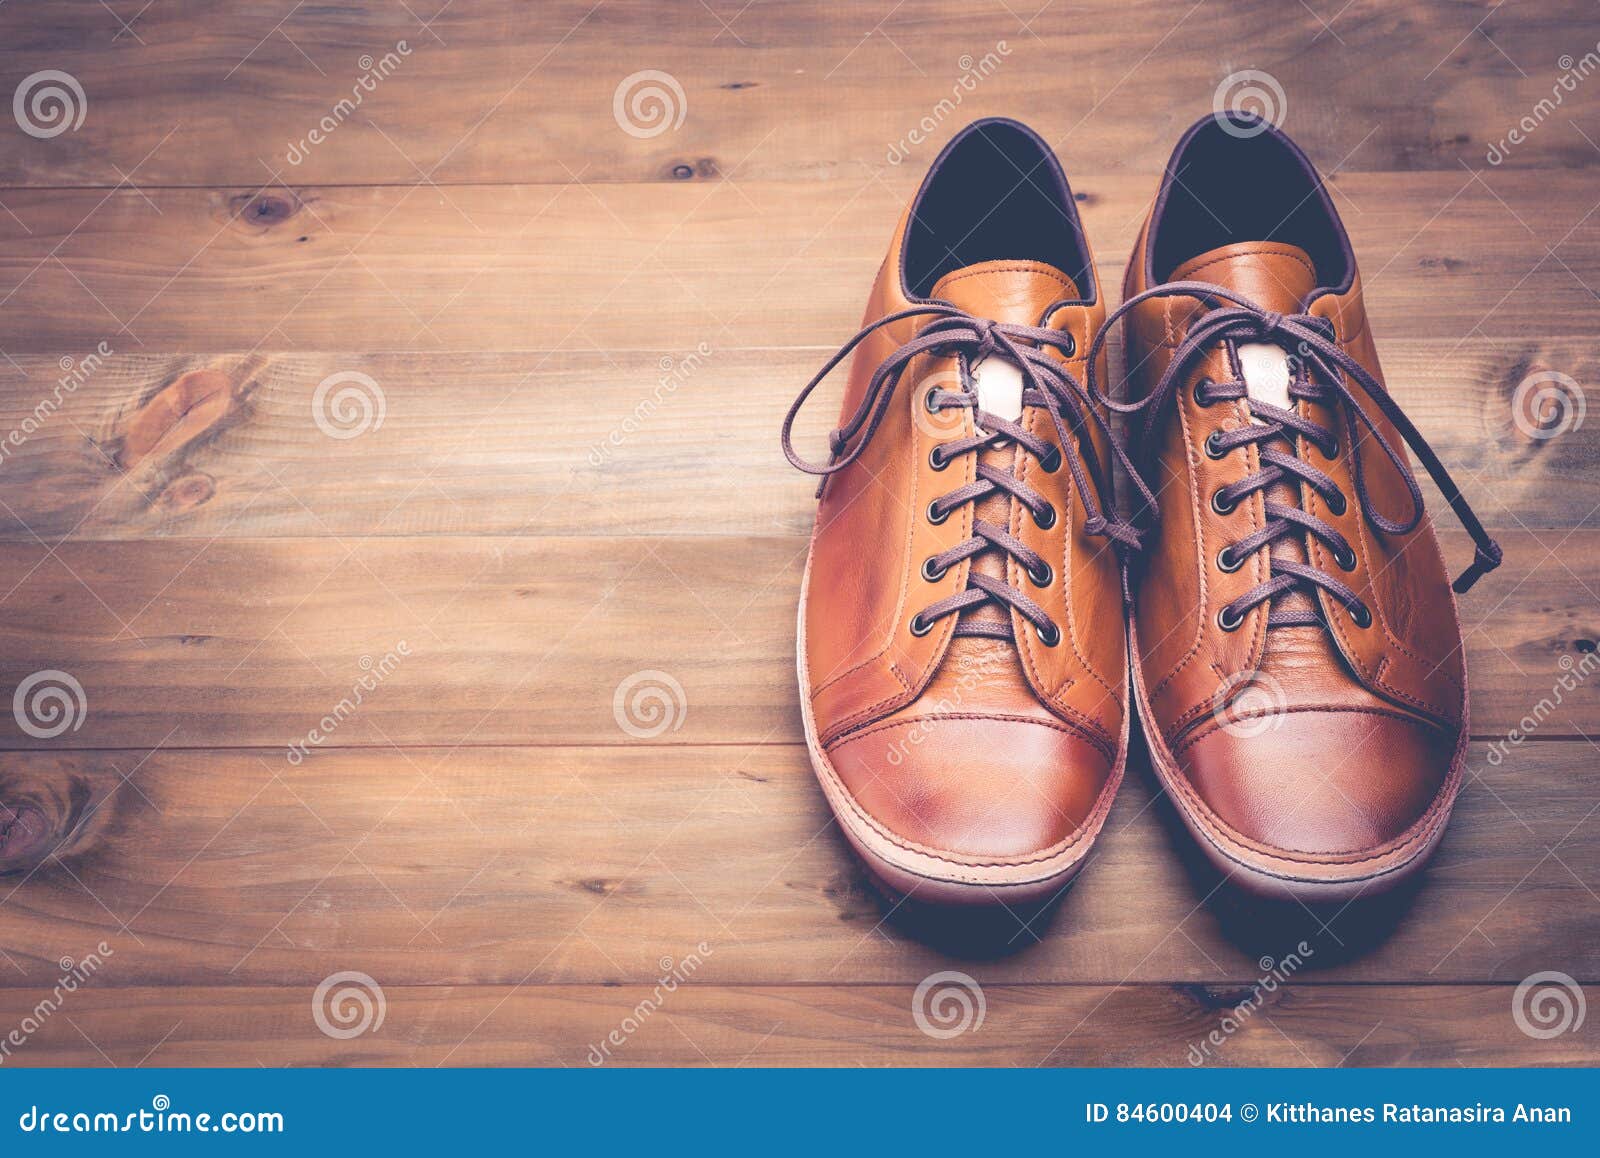 A Pair of Brown Leather Shoes with Vintage Stock Photo - Image of boot ...